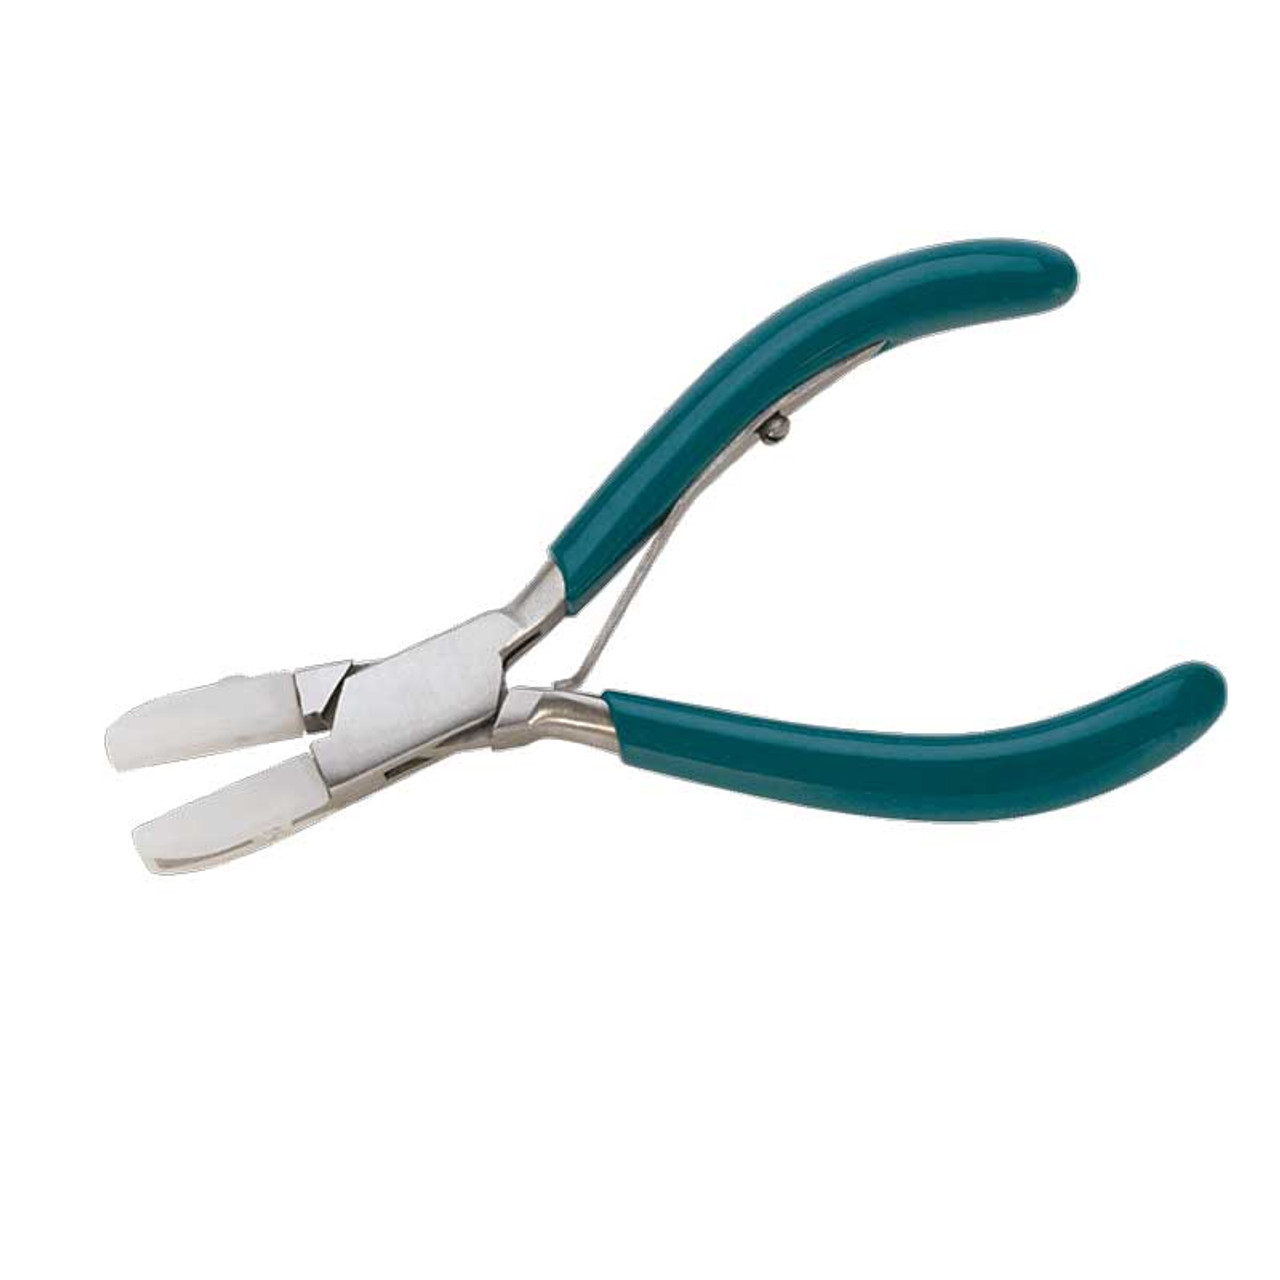 Nylon Jaw Pliers with Spring for Jewelry Making